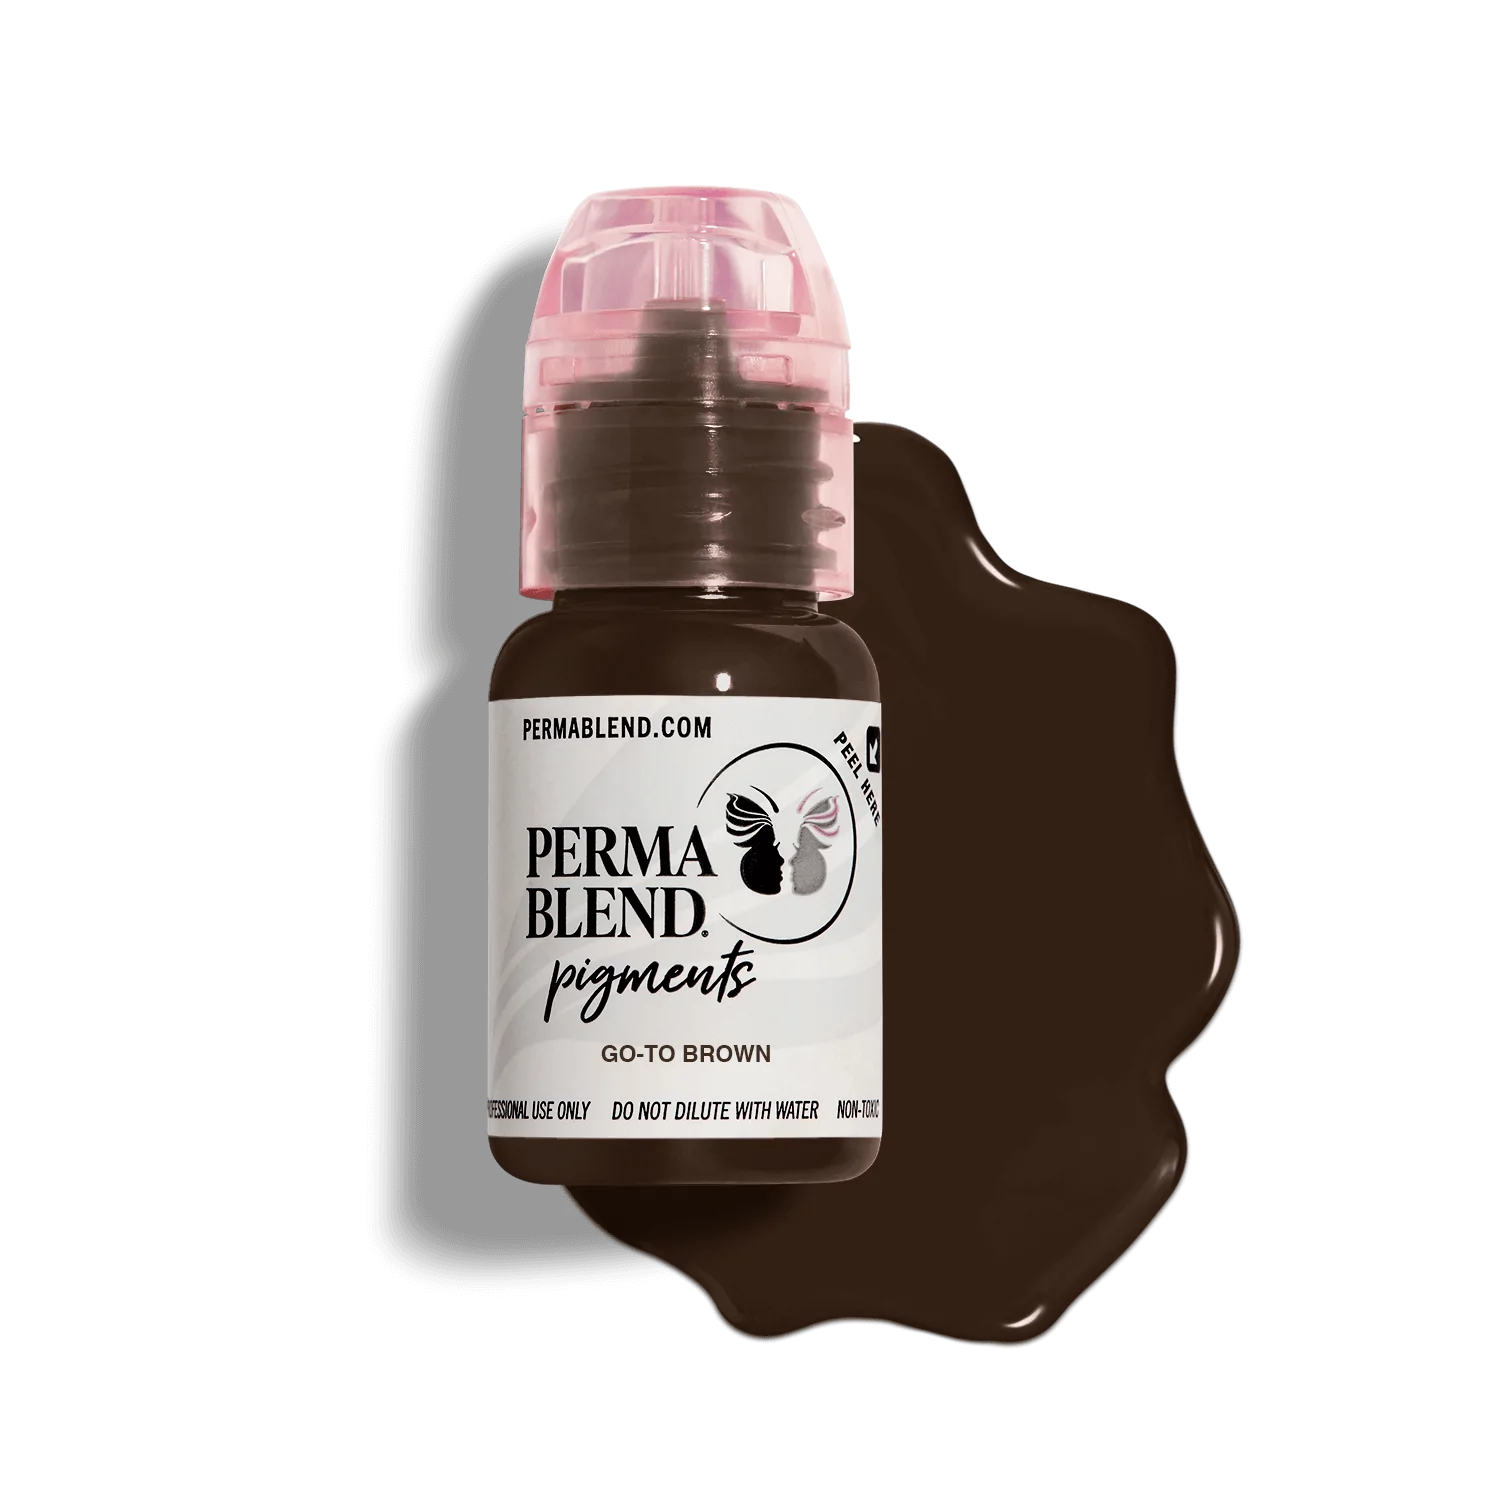 Perma Blend - Go-To-Brown 15ml